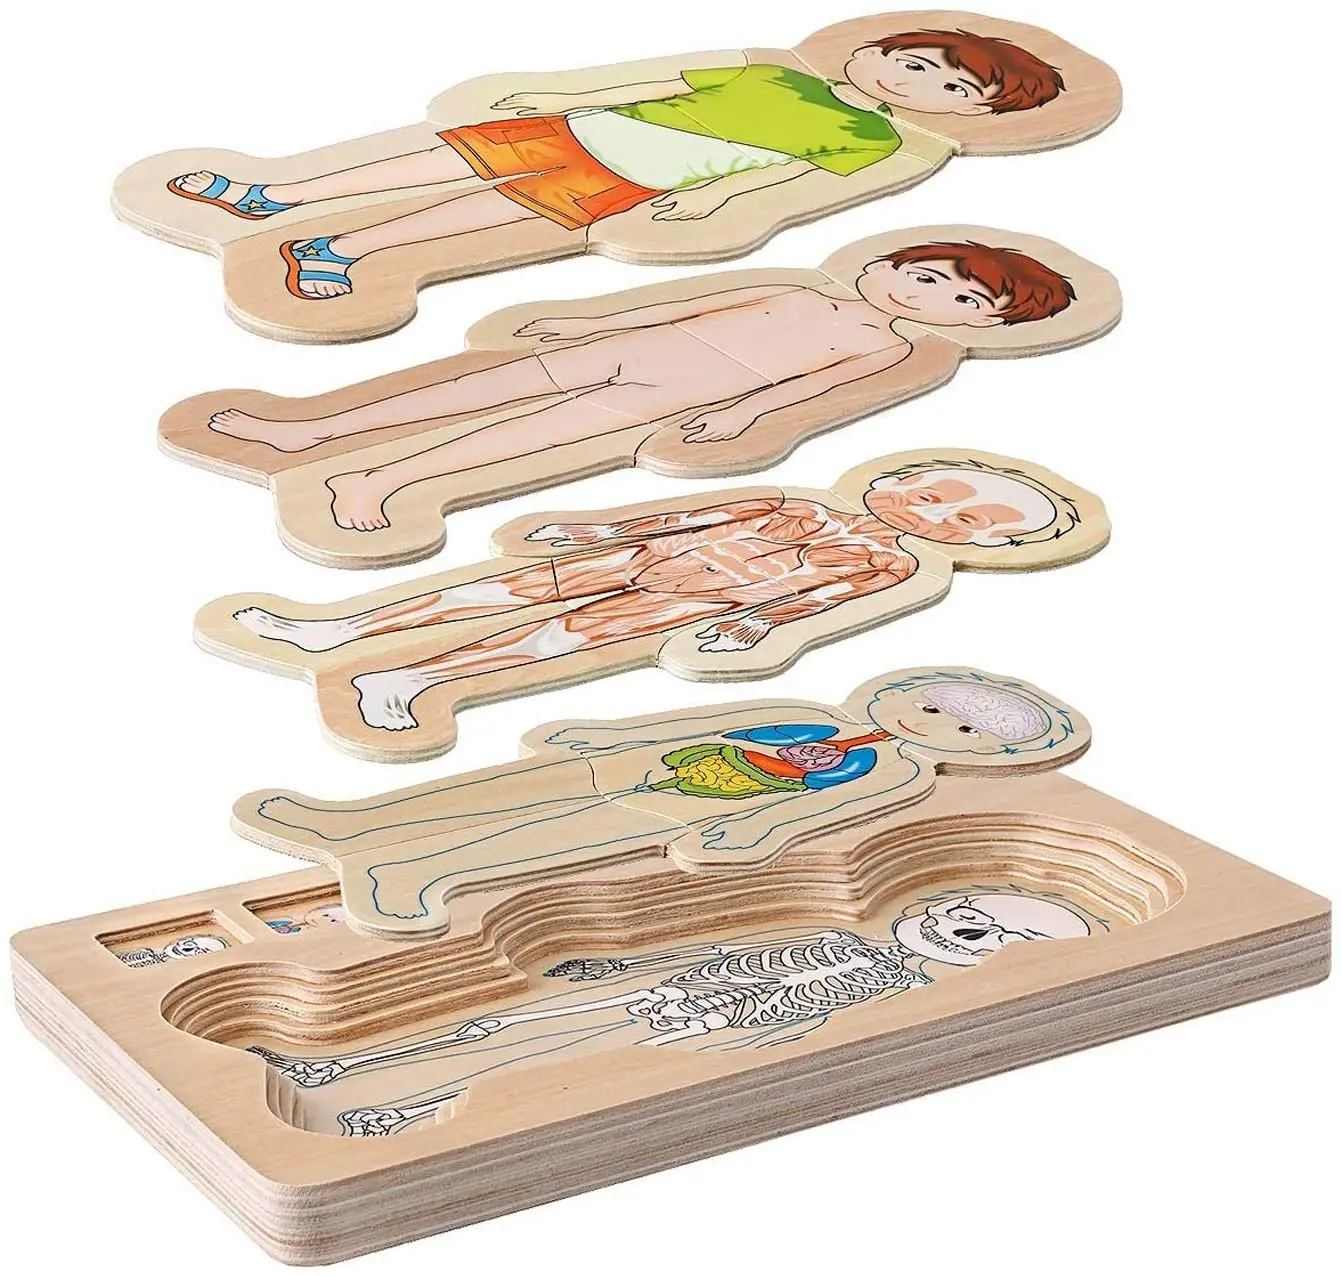 

Children Body Montessori Layers Learning Toy Wooden 5 Play Puzzles Skeleton Human Structure Body Puzzle Jigsaw Anatomy Preschool